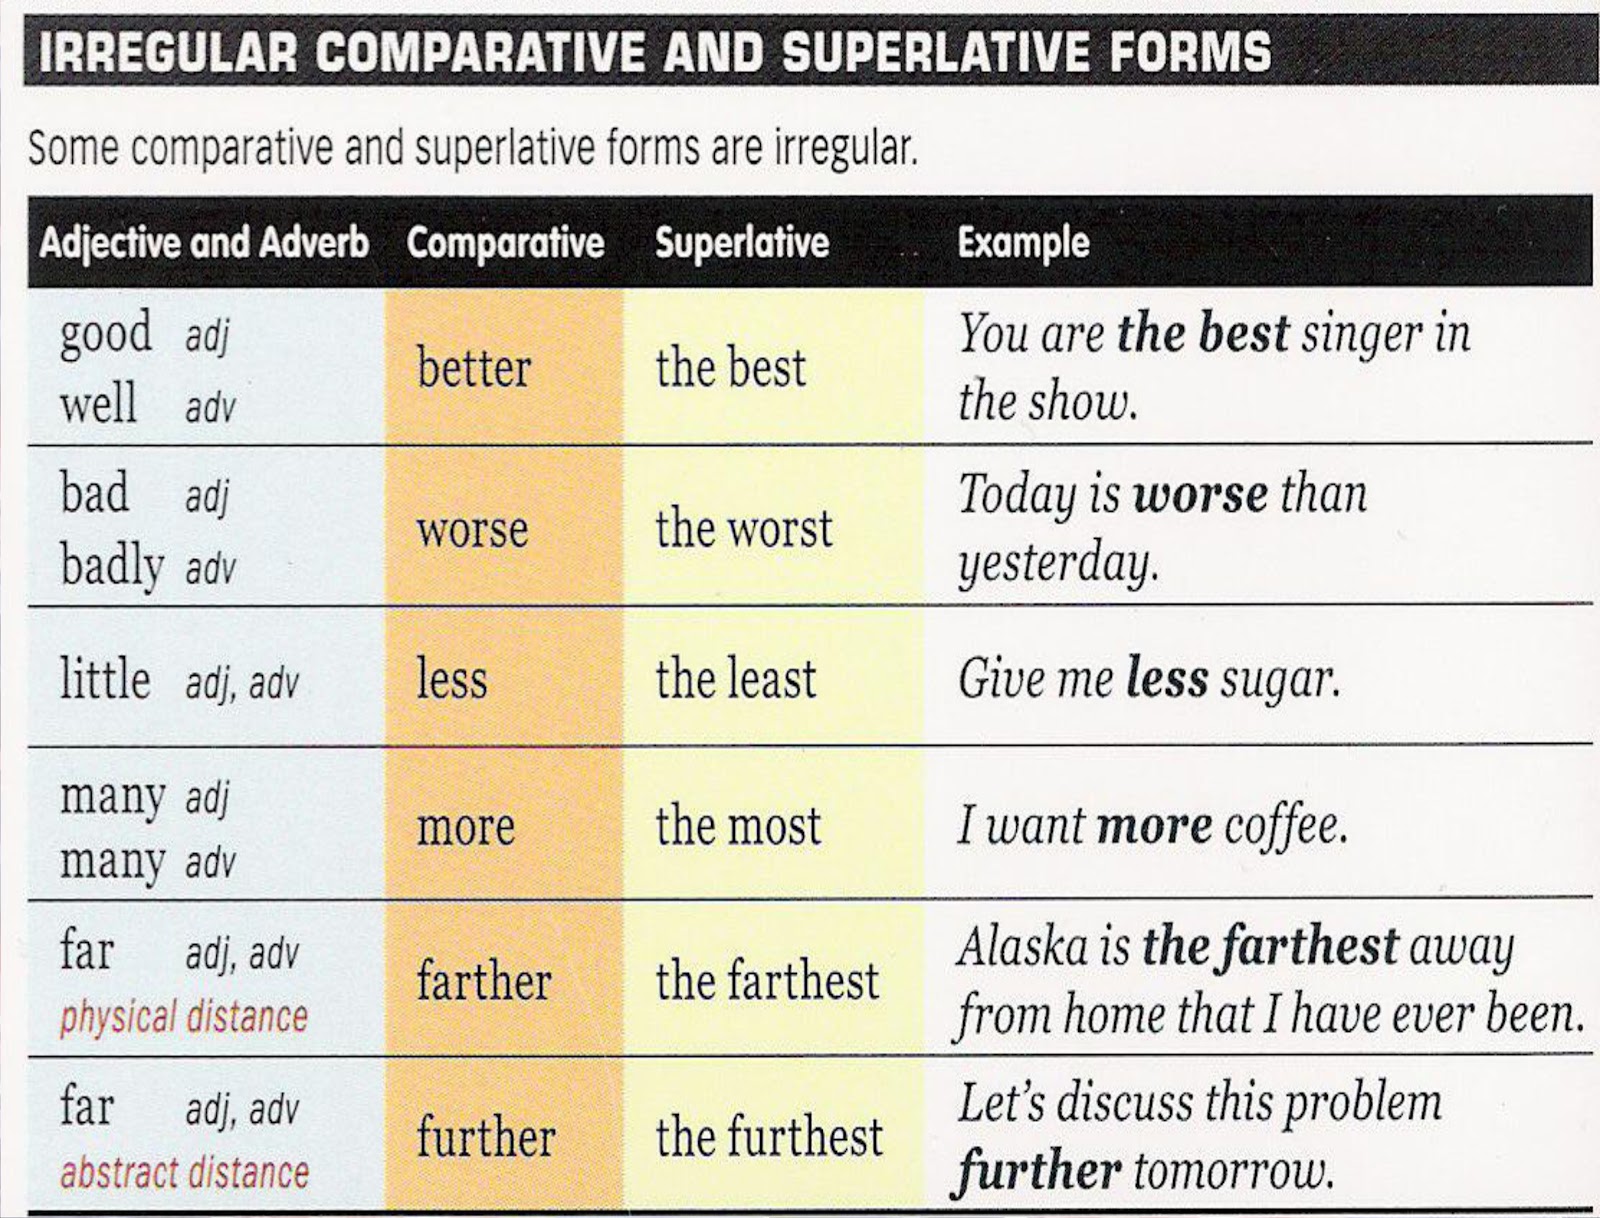 Old comparative and superlative forms. Английский Comparative and Superlative. Таблица Comparative and Superlative. Superlative adjectives примеры. Предложения с Comparative adjectives.